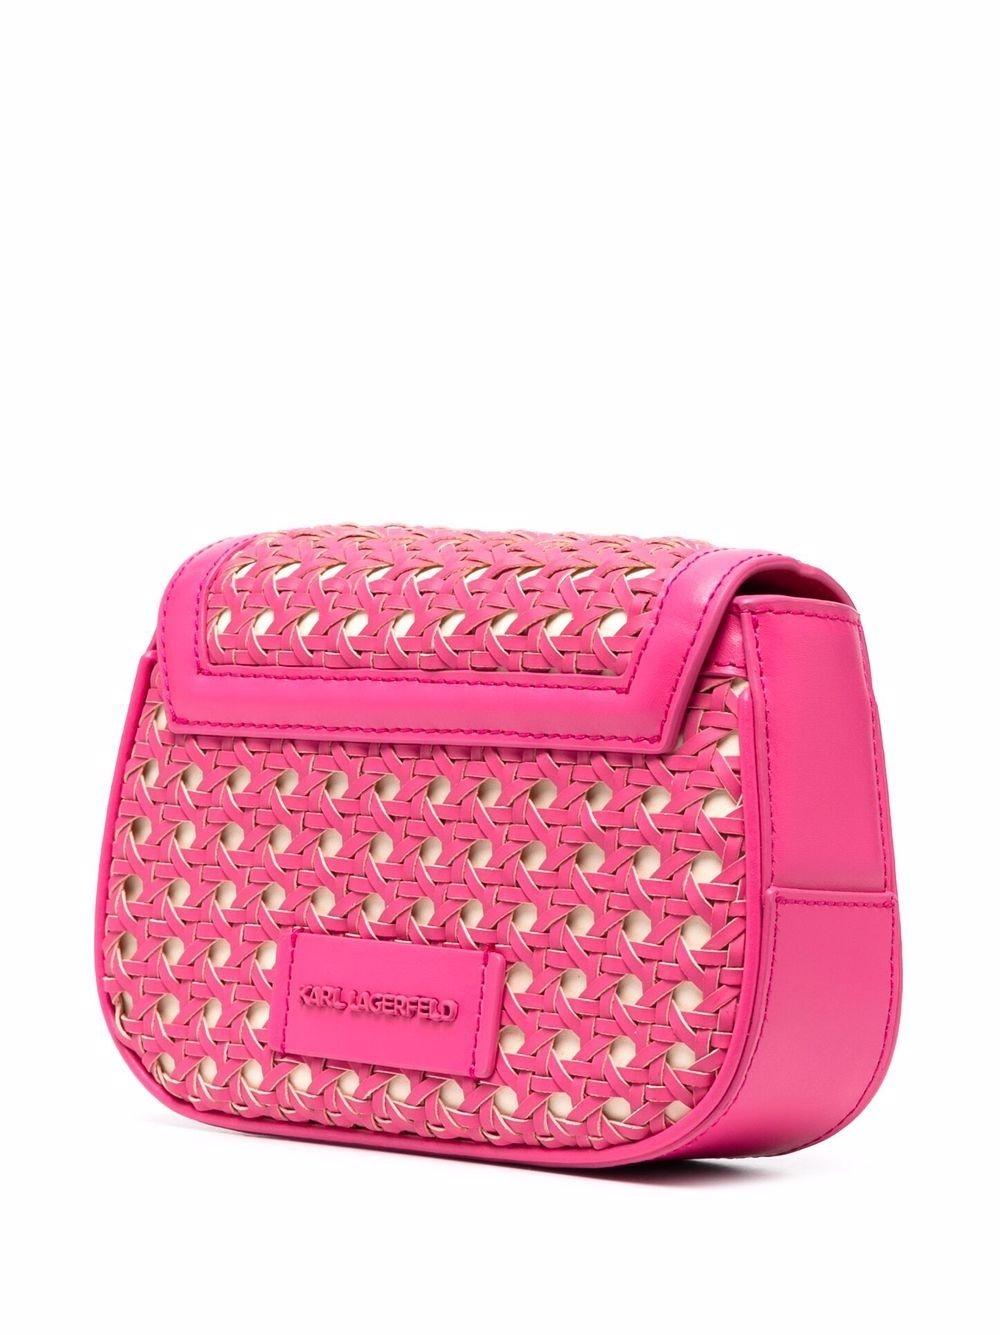 Bolso Karl Lagerfeld fucsia letters woven